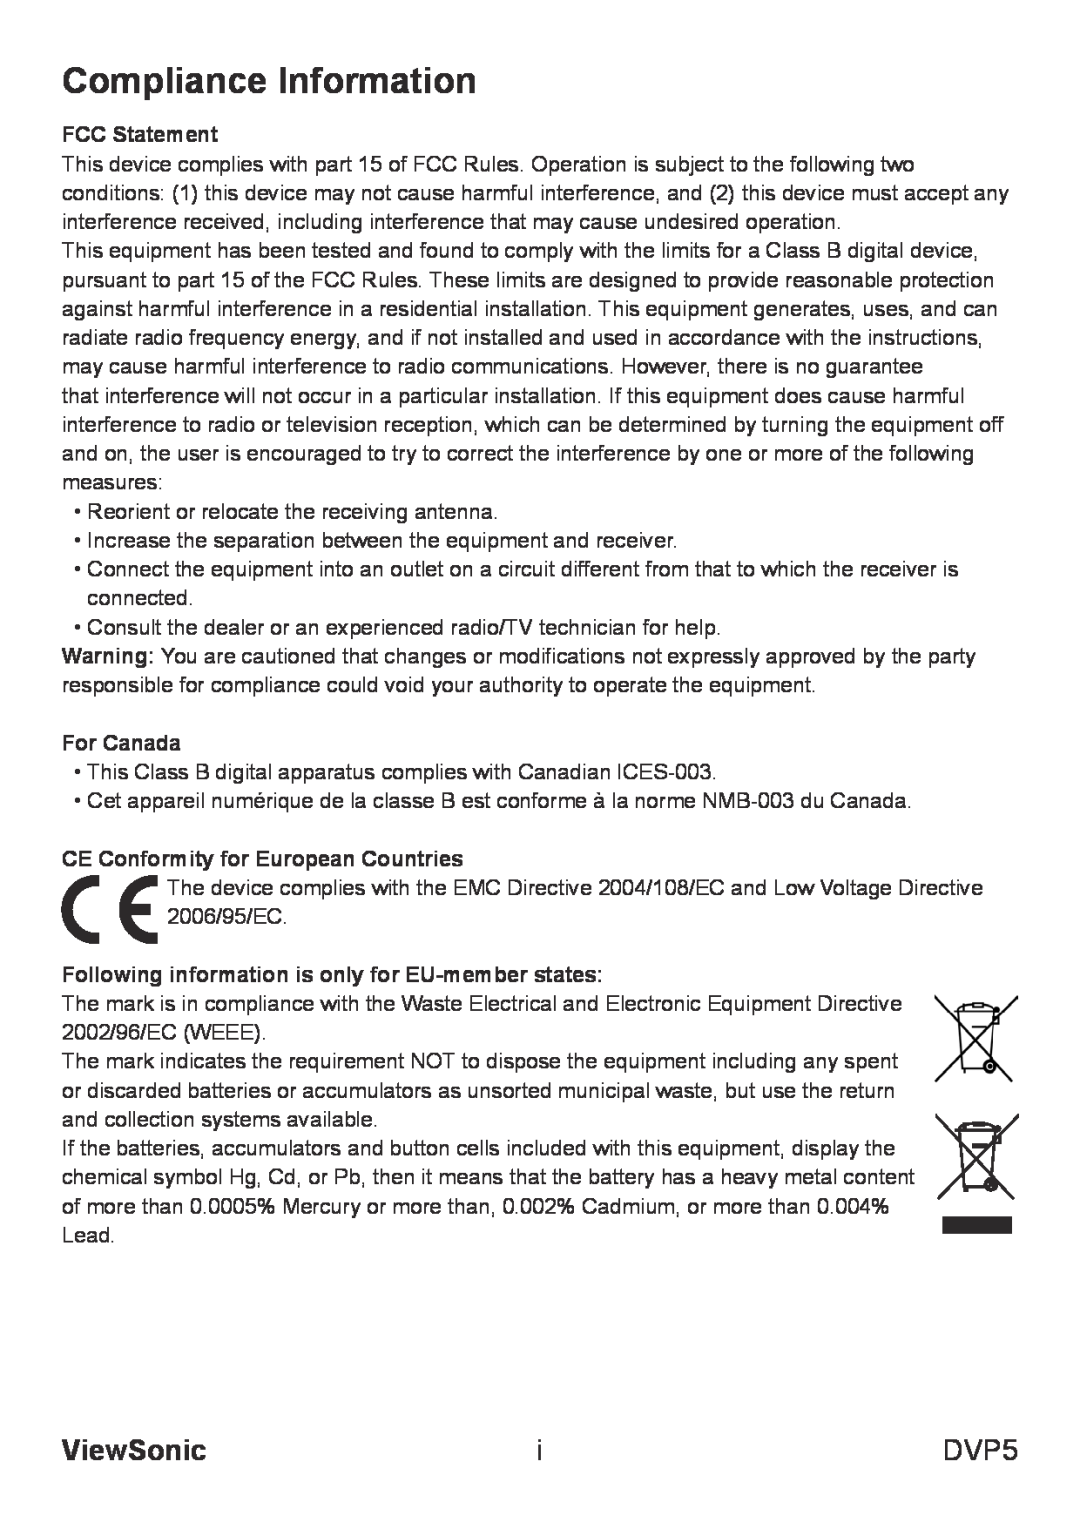 ViewSonic VS13783 Compliance Information, ViewSonic, DVP5, FCC Statement, For Canada, CE Conformity for European Countries 